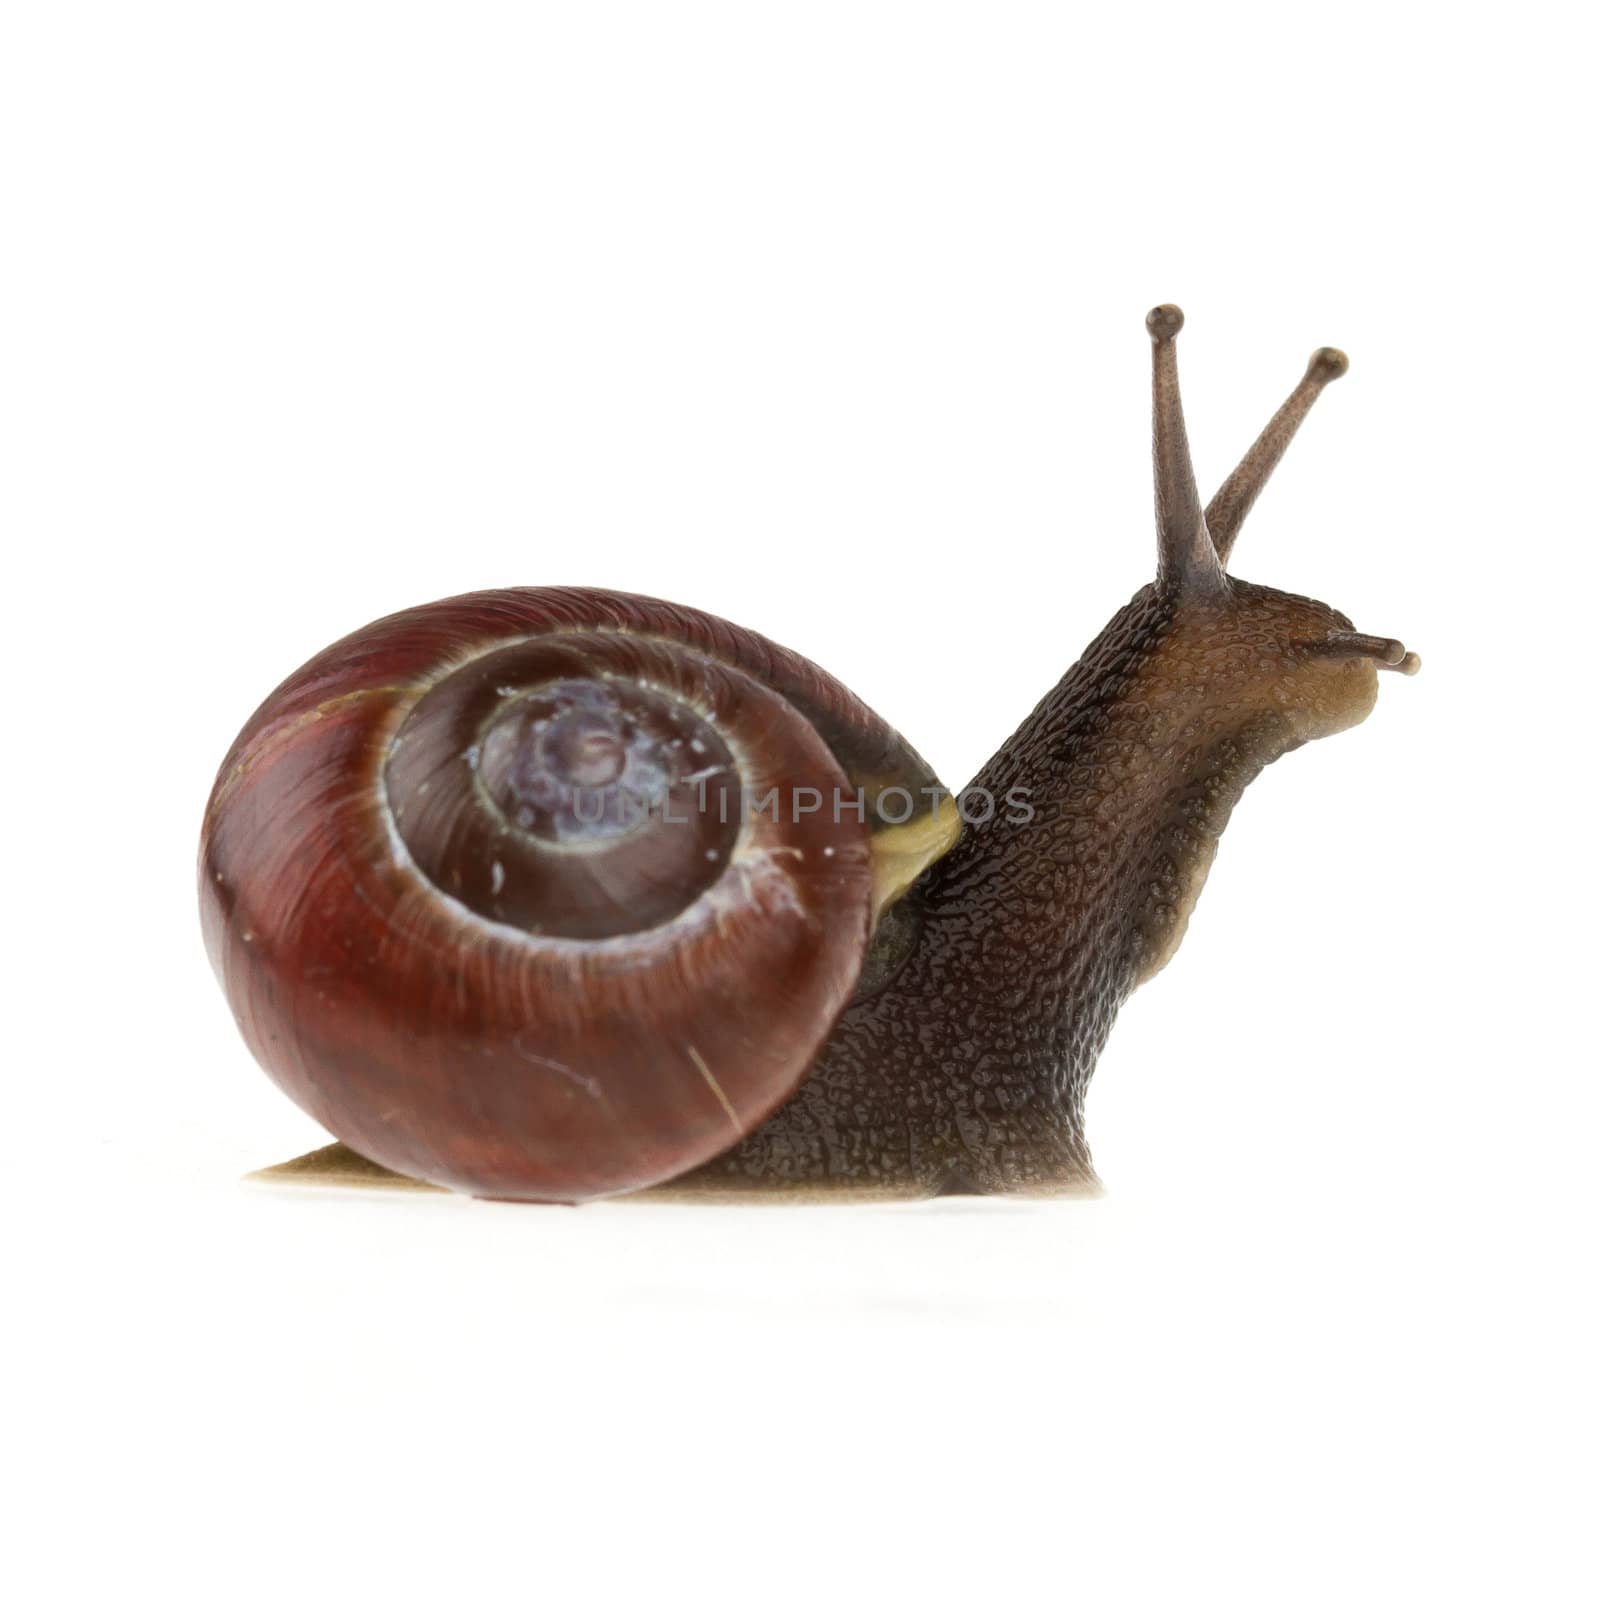 Garden snail (Helix aspersa) isolated on a white background